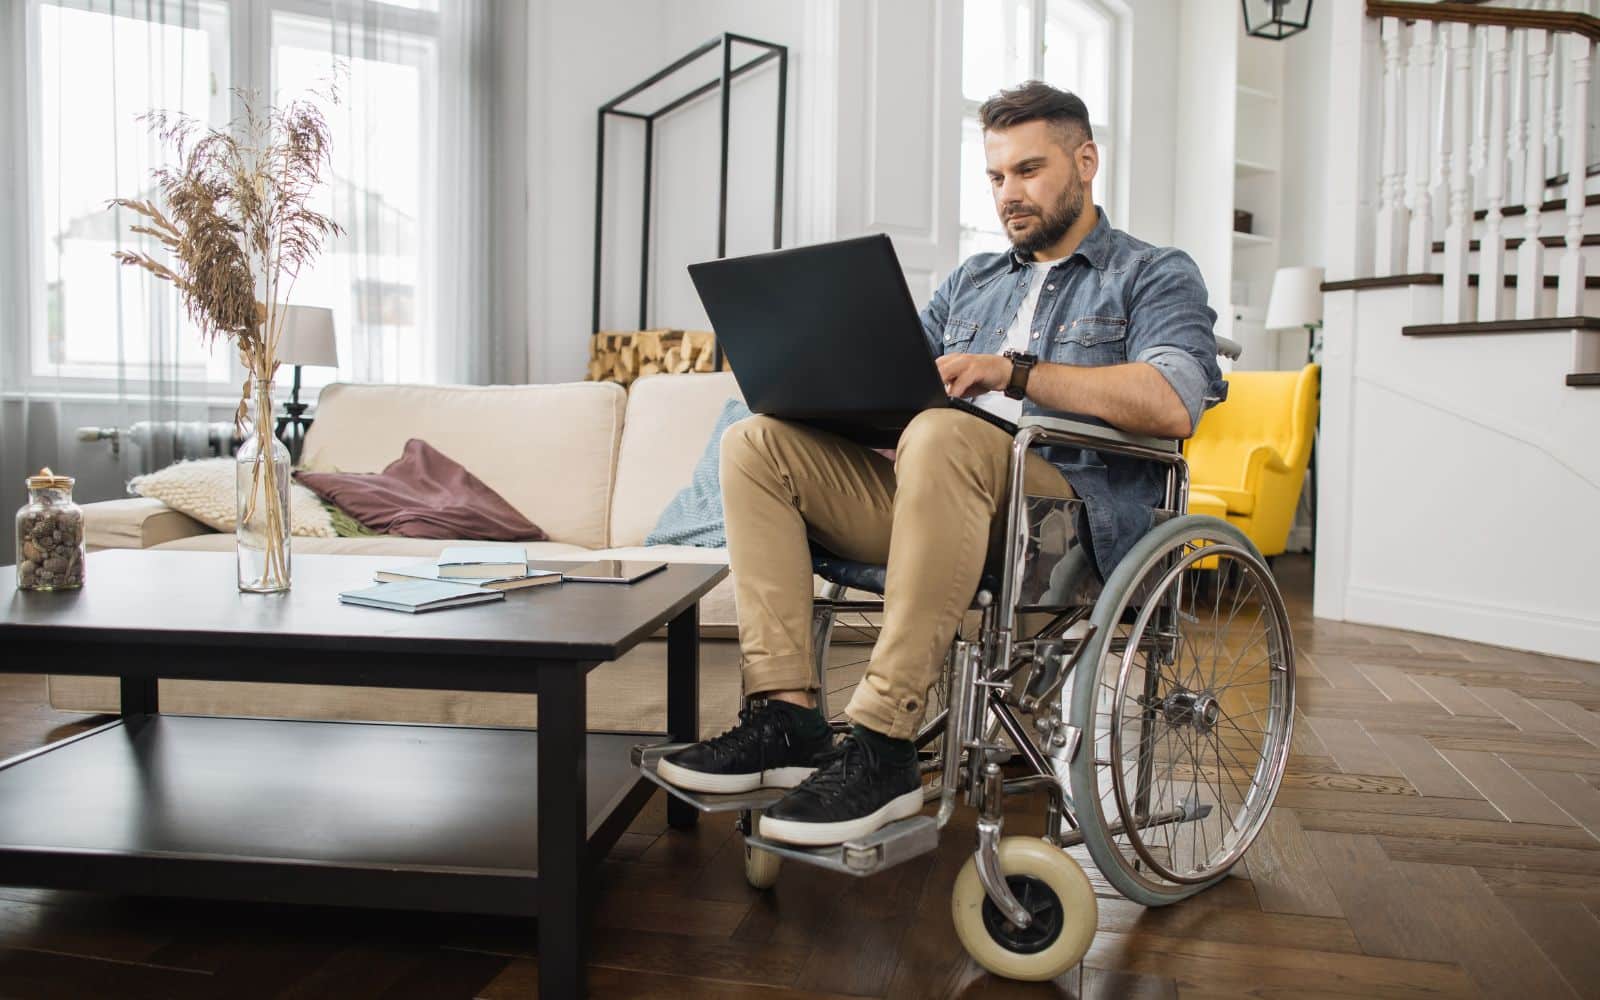 Remote Work, A New Way Of Inclusion For Employees With Disabilities, Research Shows